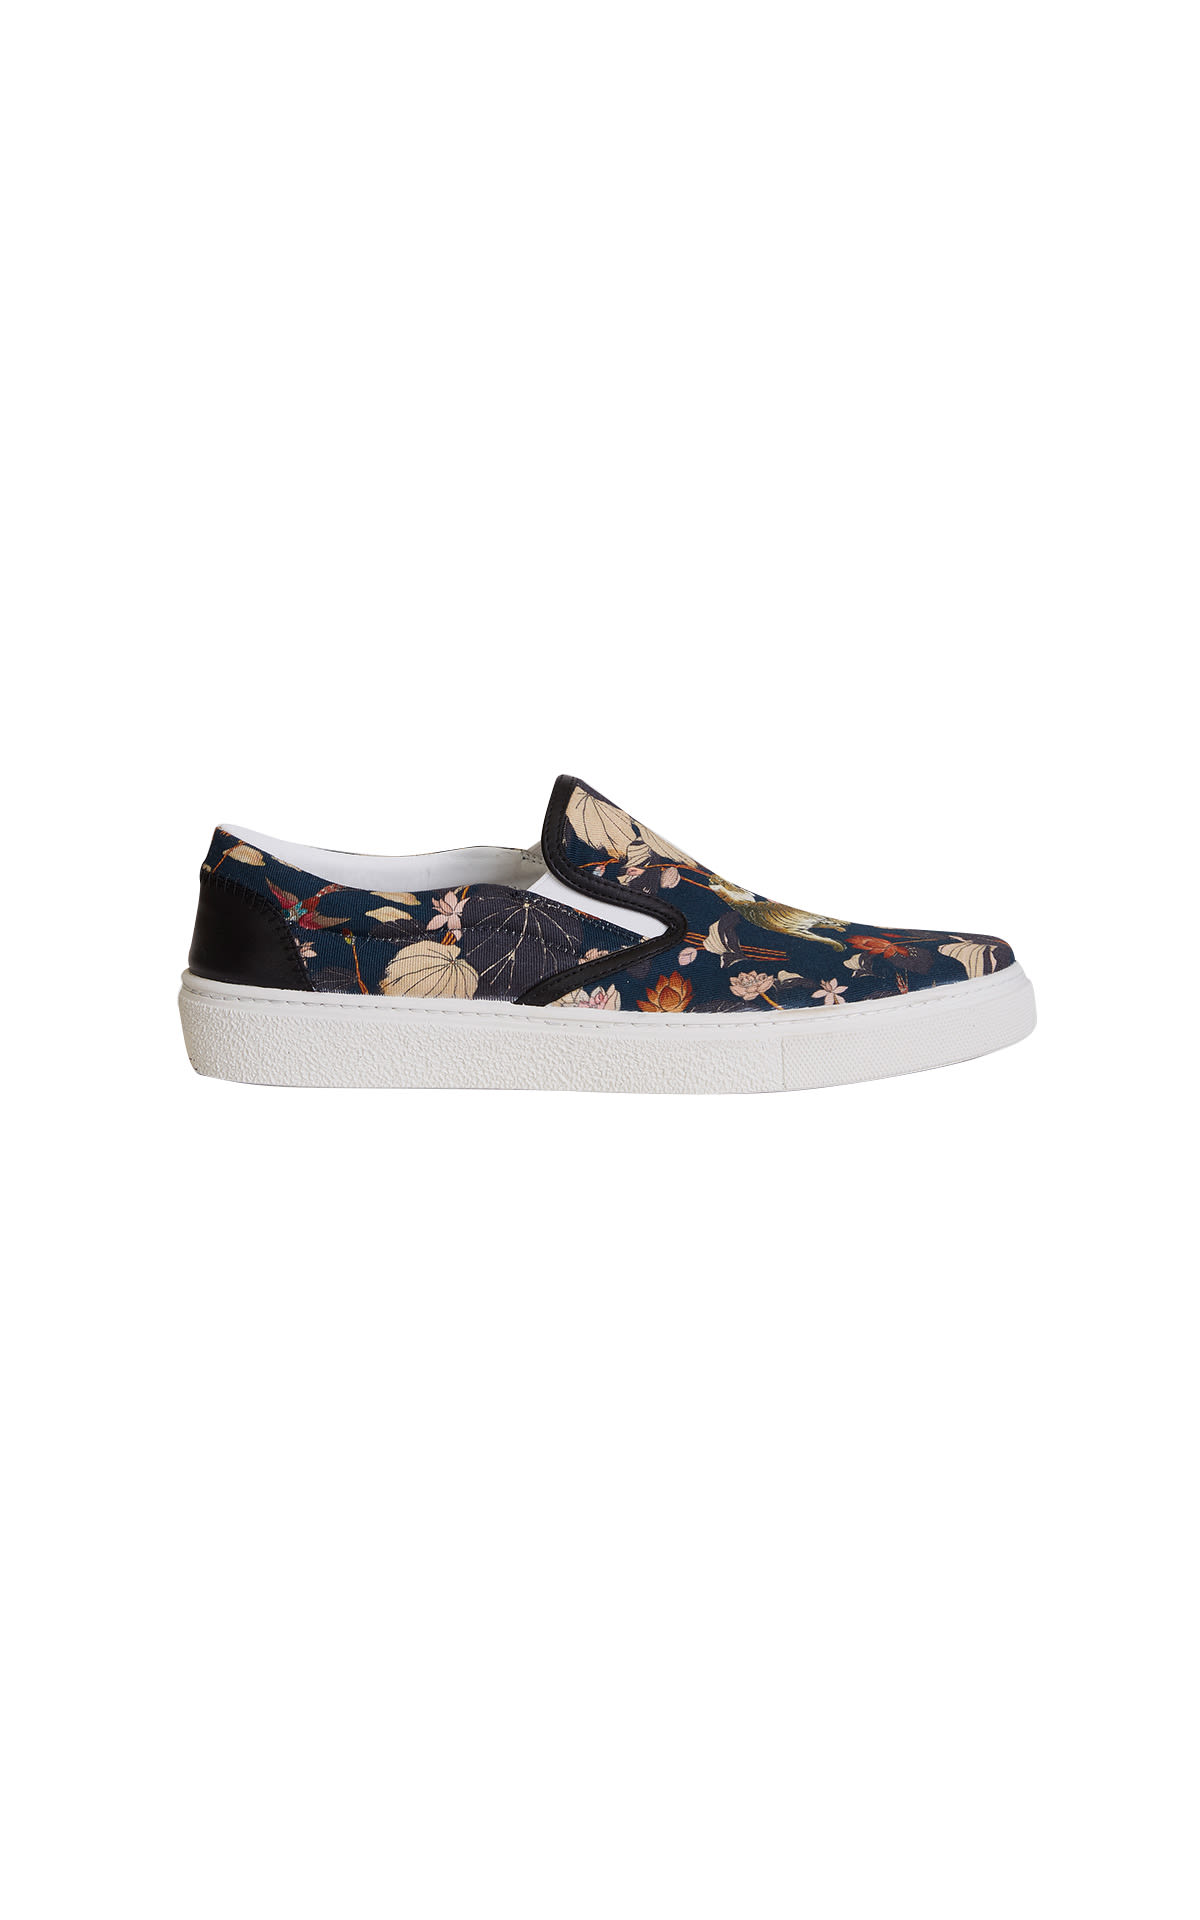 Sneakers slip-on stampa floreale